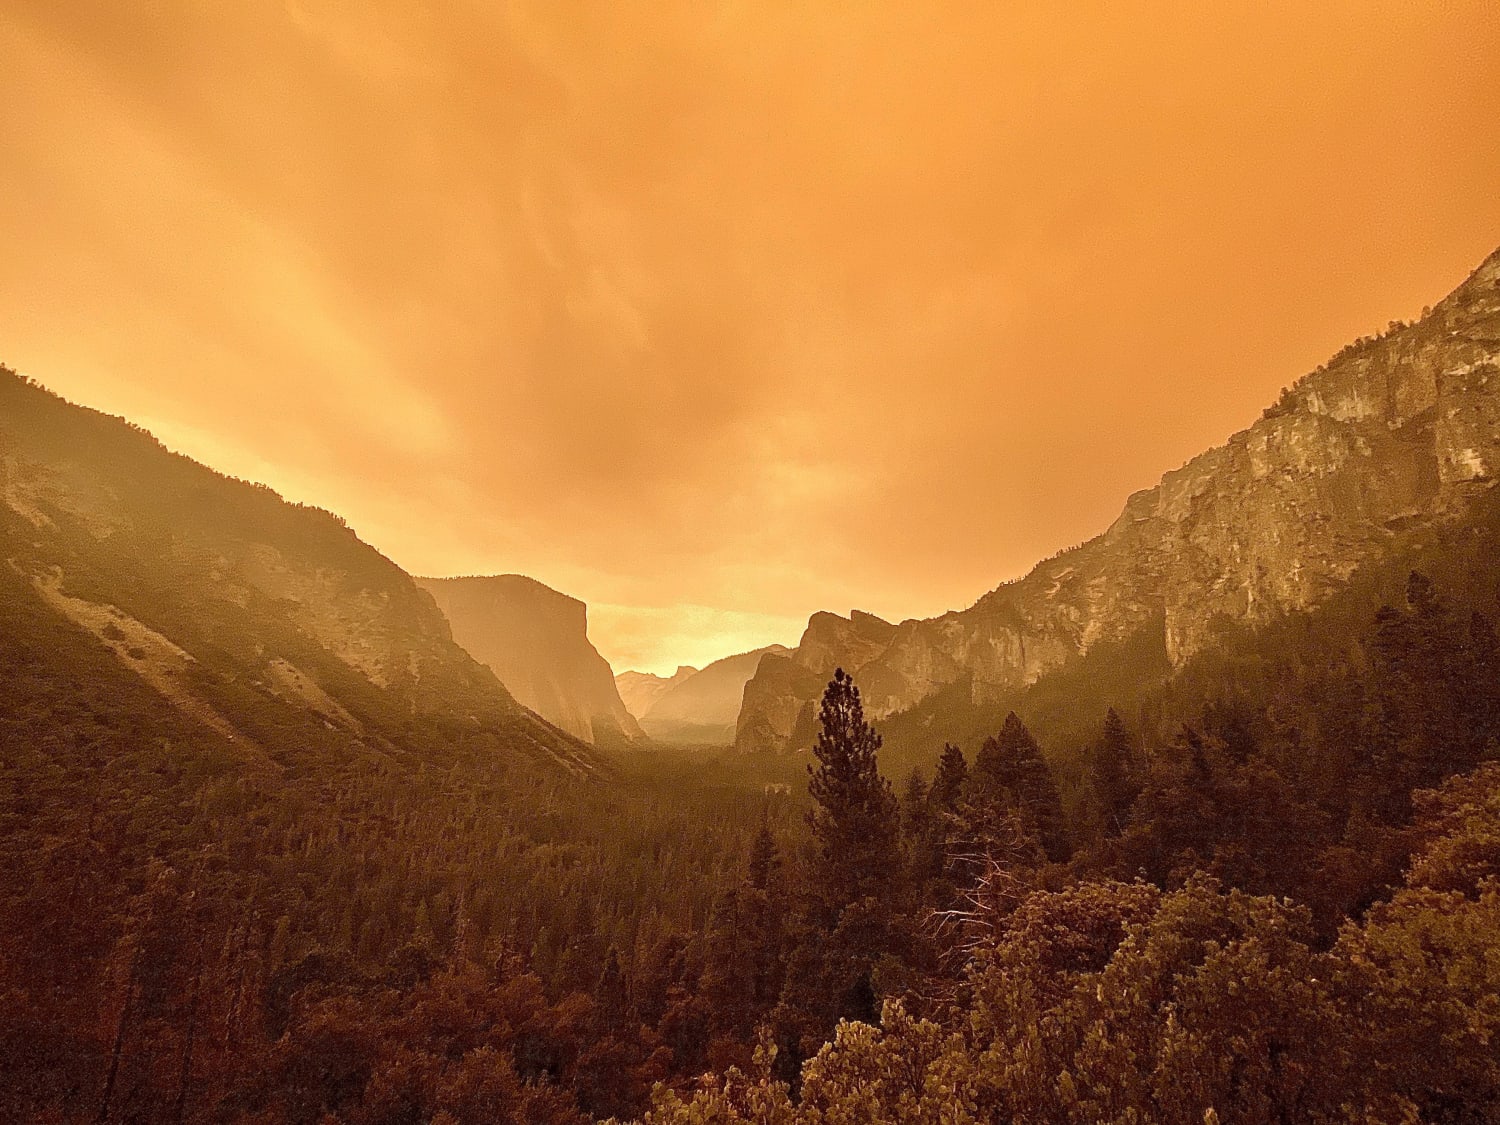 Yosemite Valley today blanketed in wildfire smoke